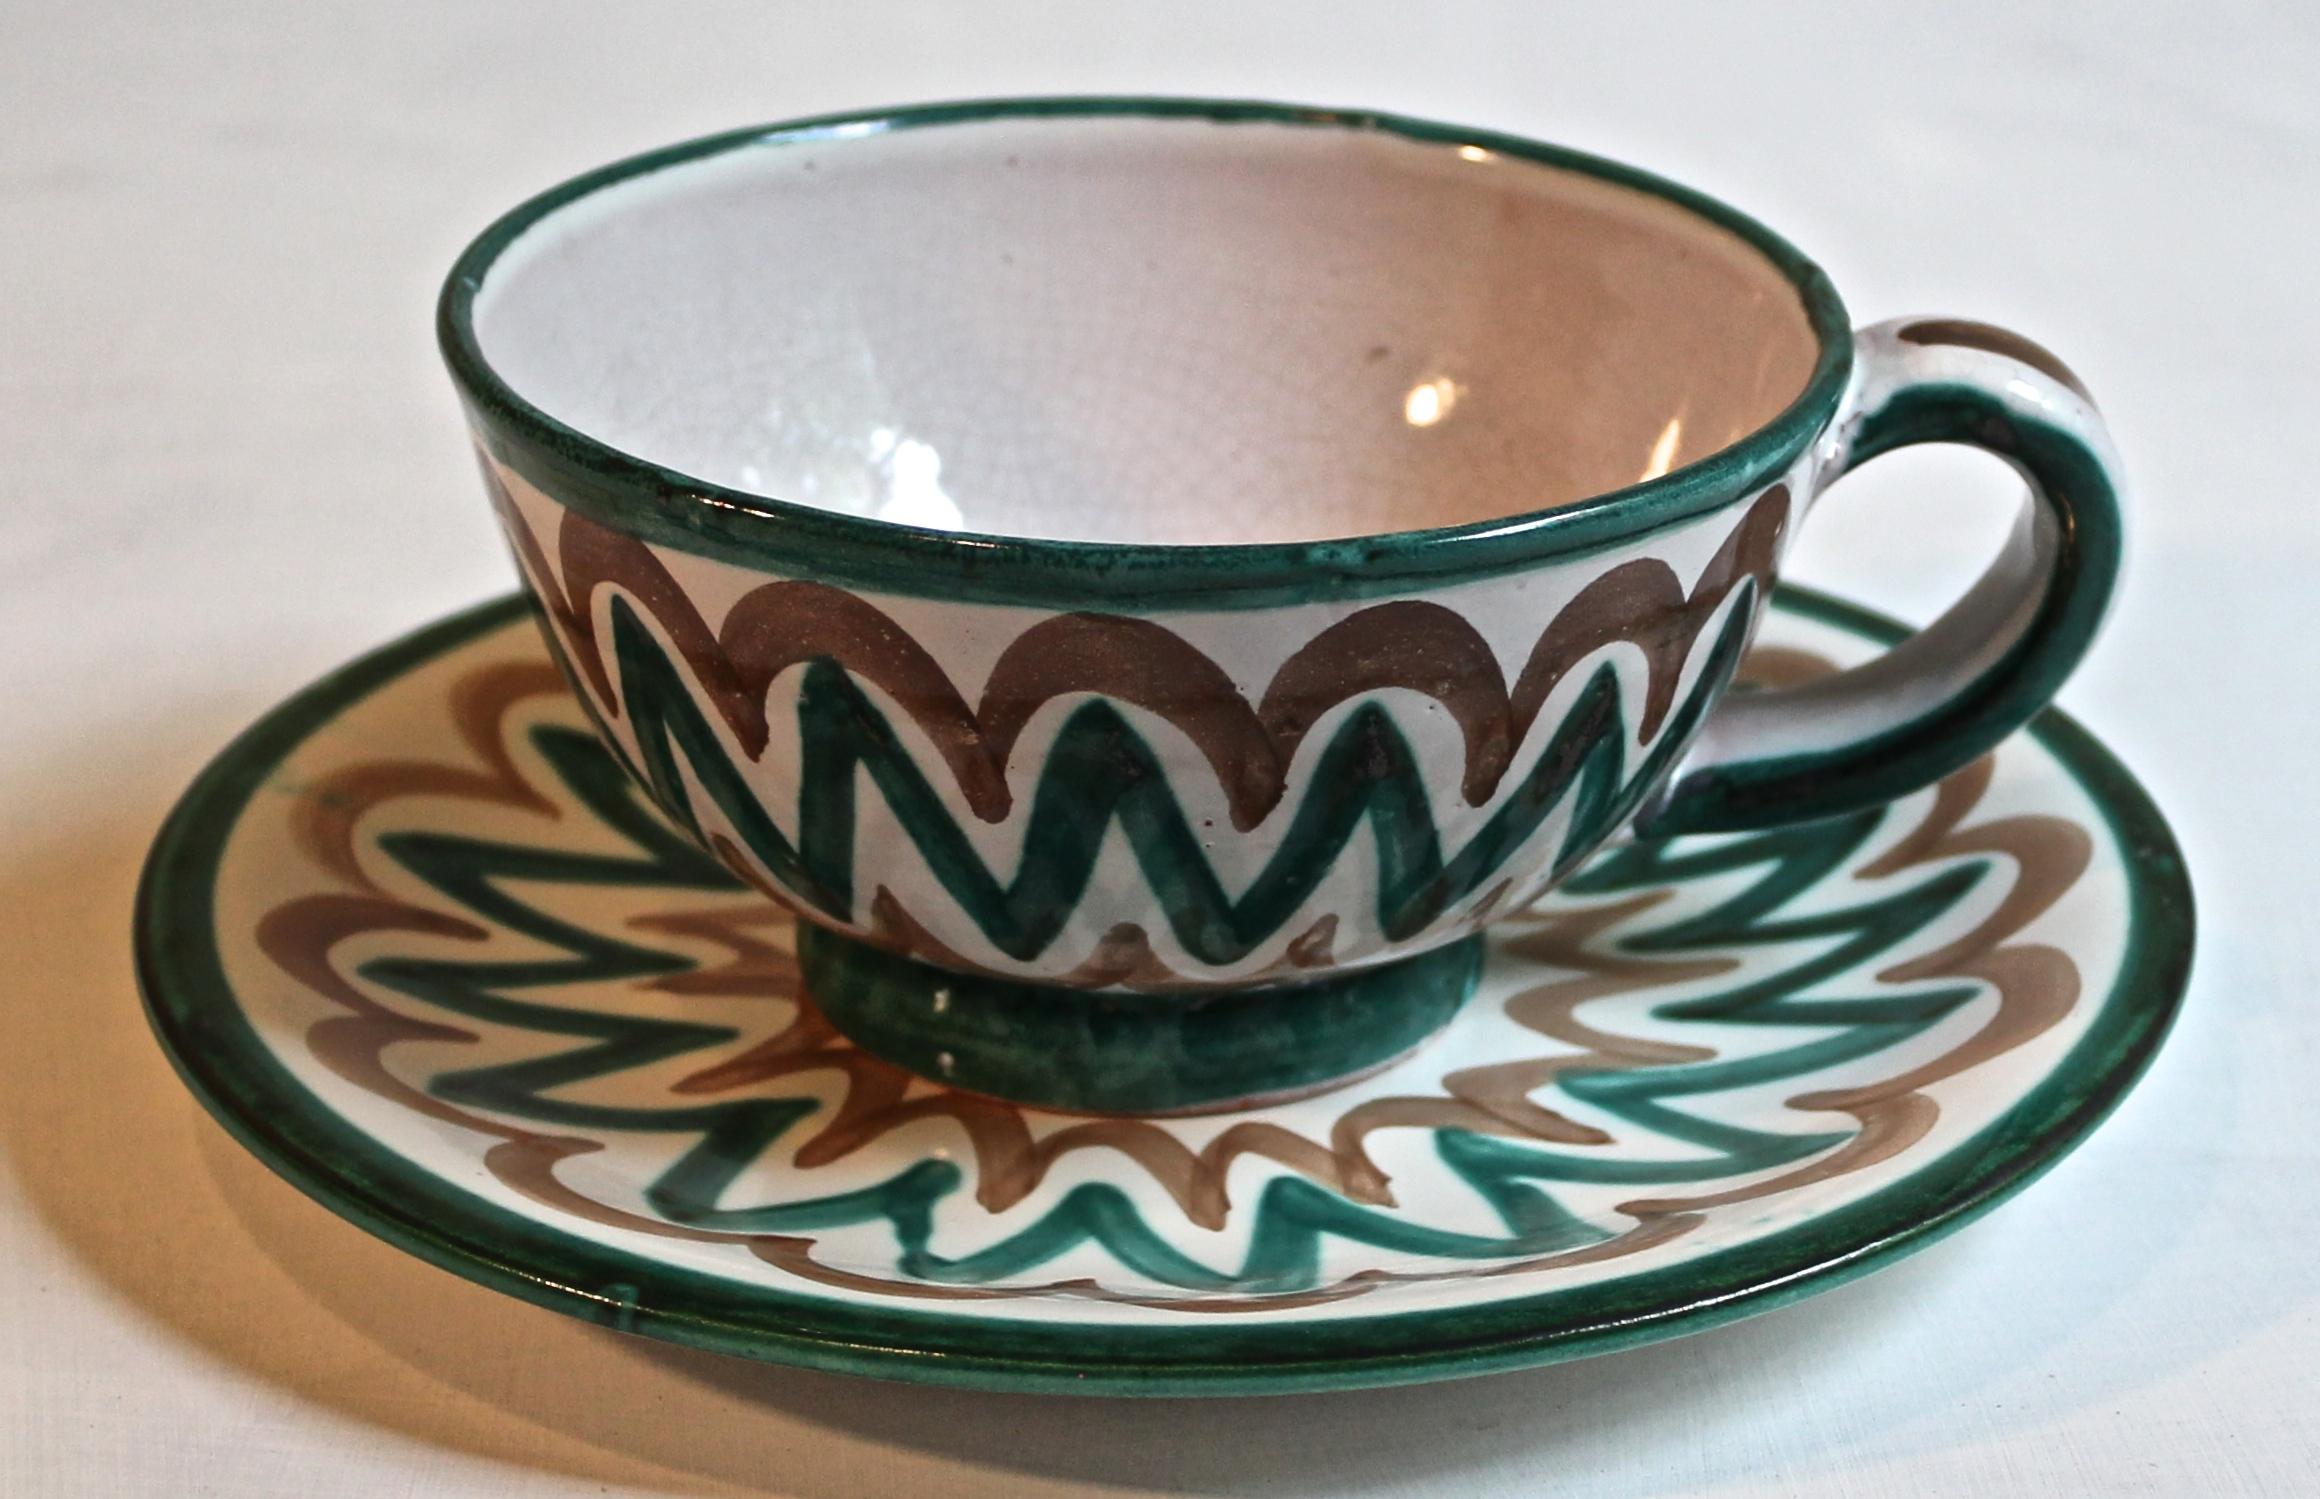 Four 'bistro' cups and saucers. Cup diameter 4 3/4